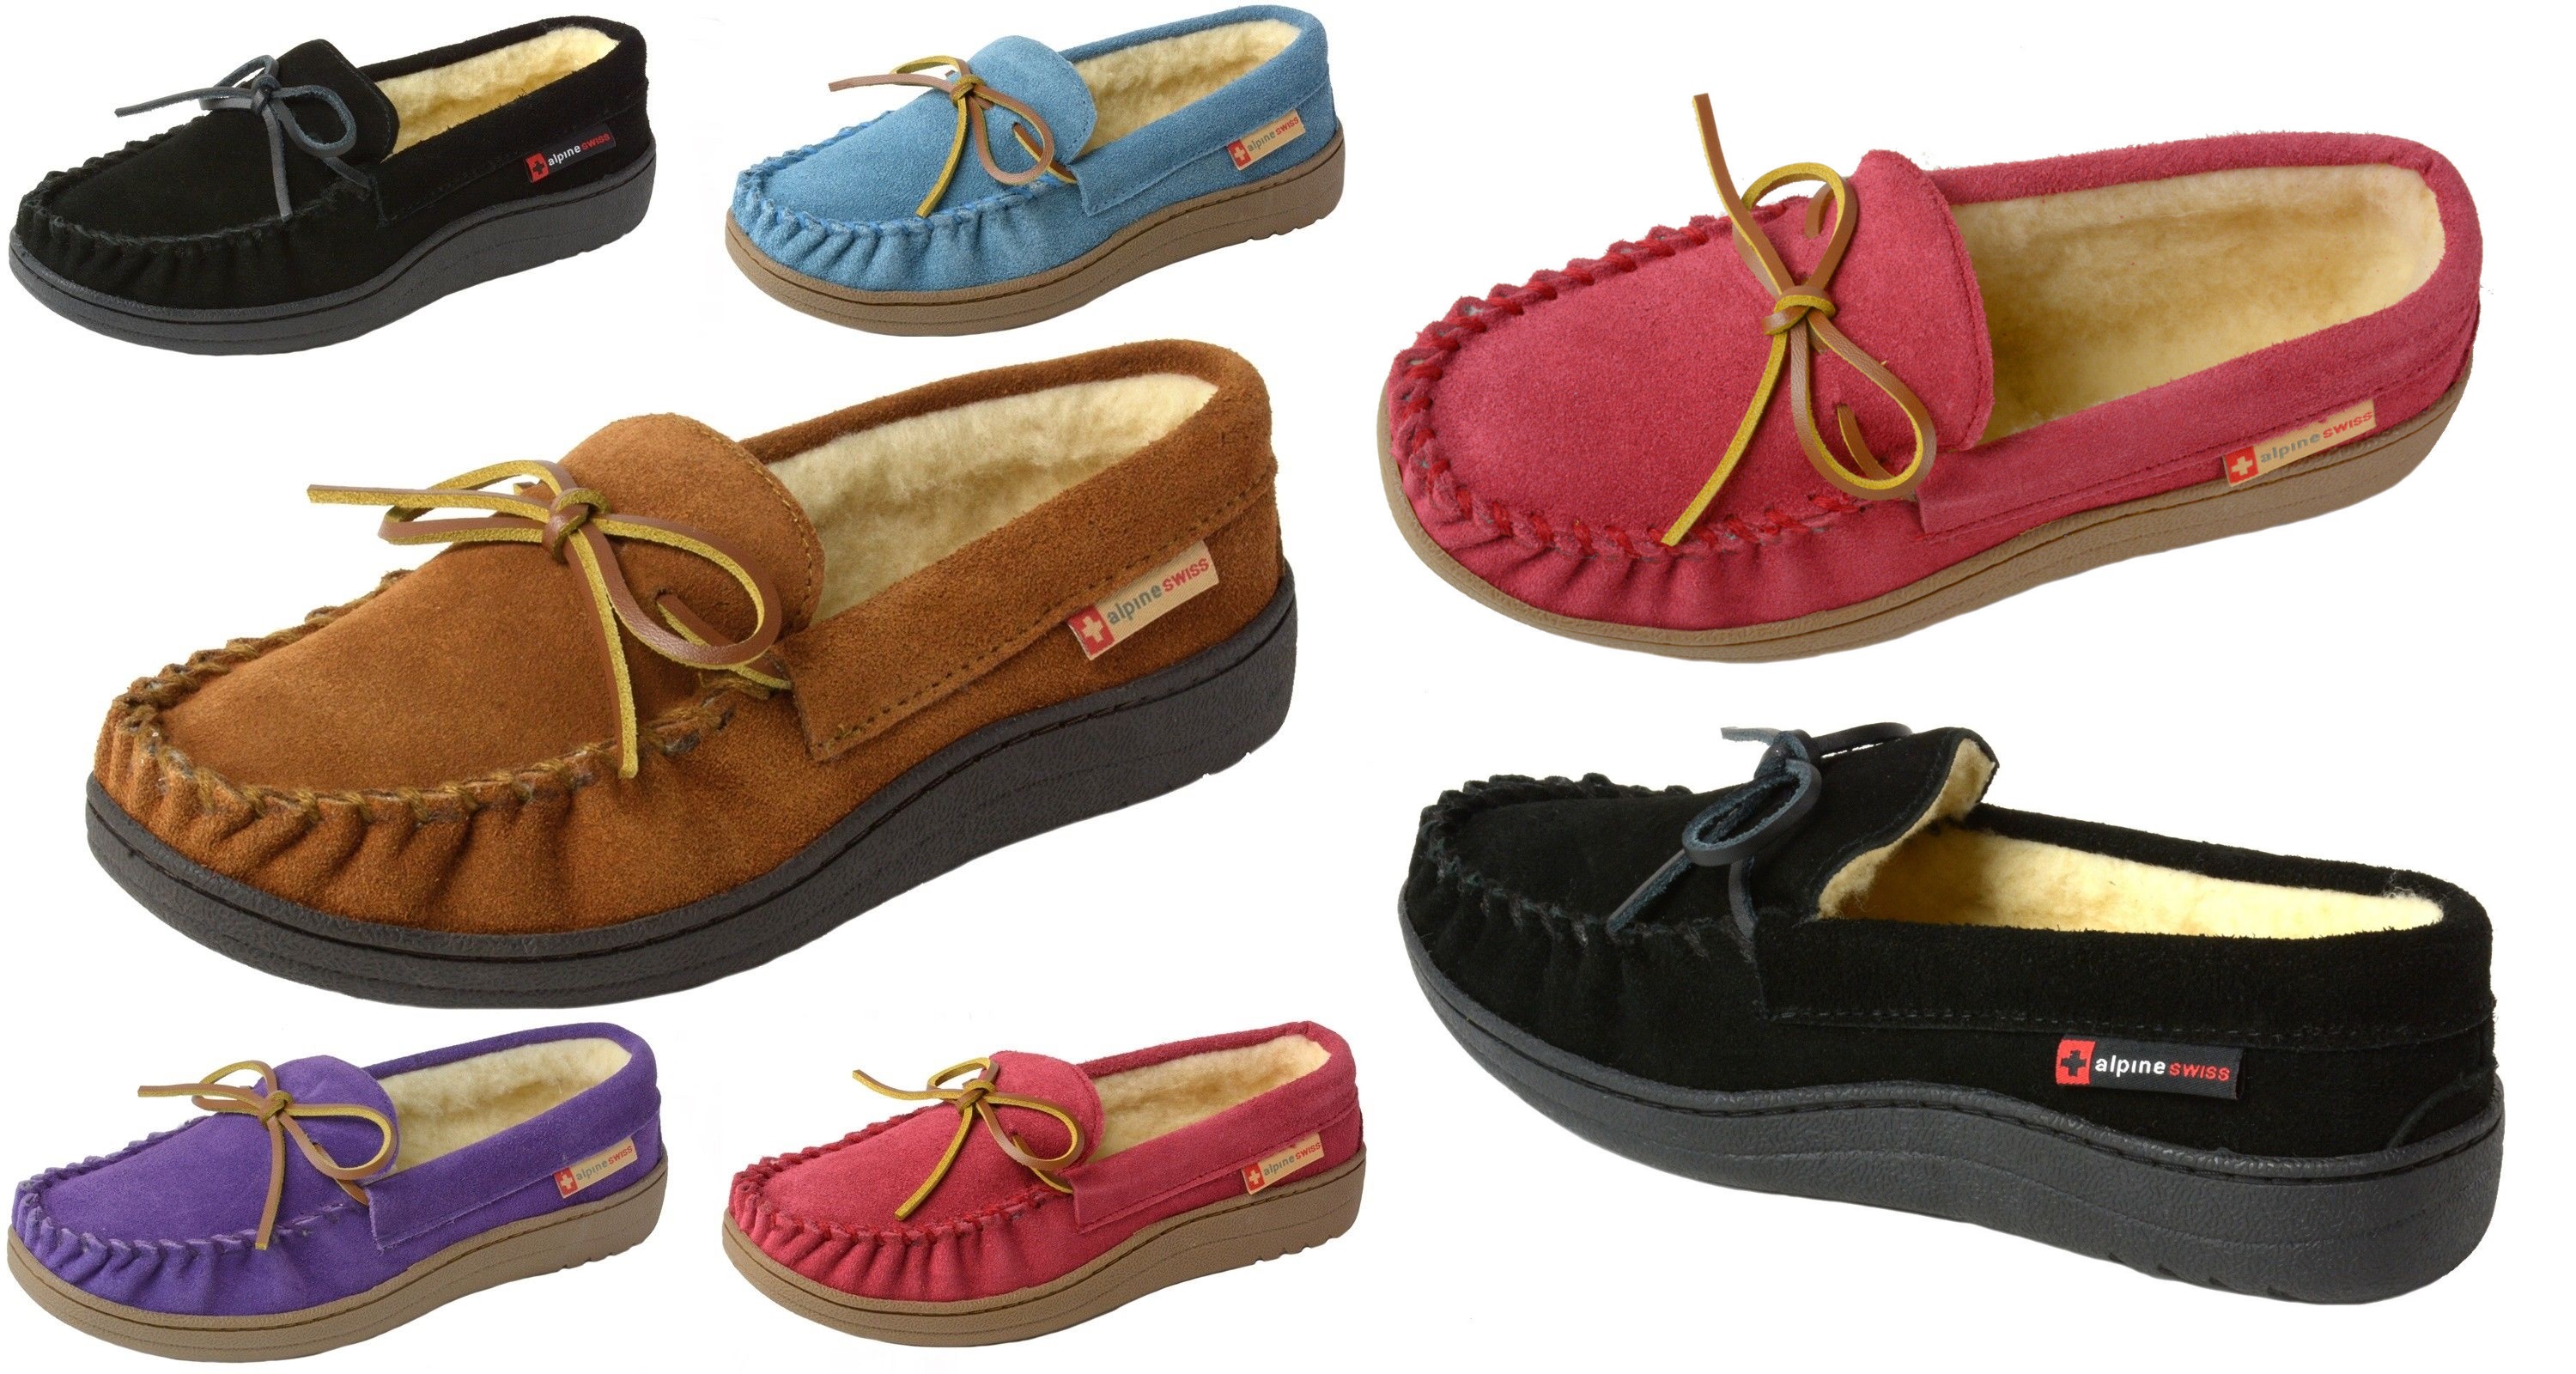 Alpine Swiss Sabine Women’s Suede Shearling Moccasin Slippers Only $14.99!